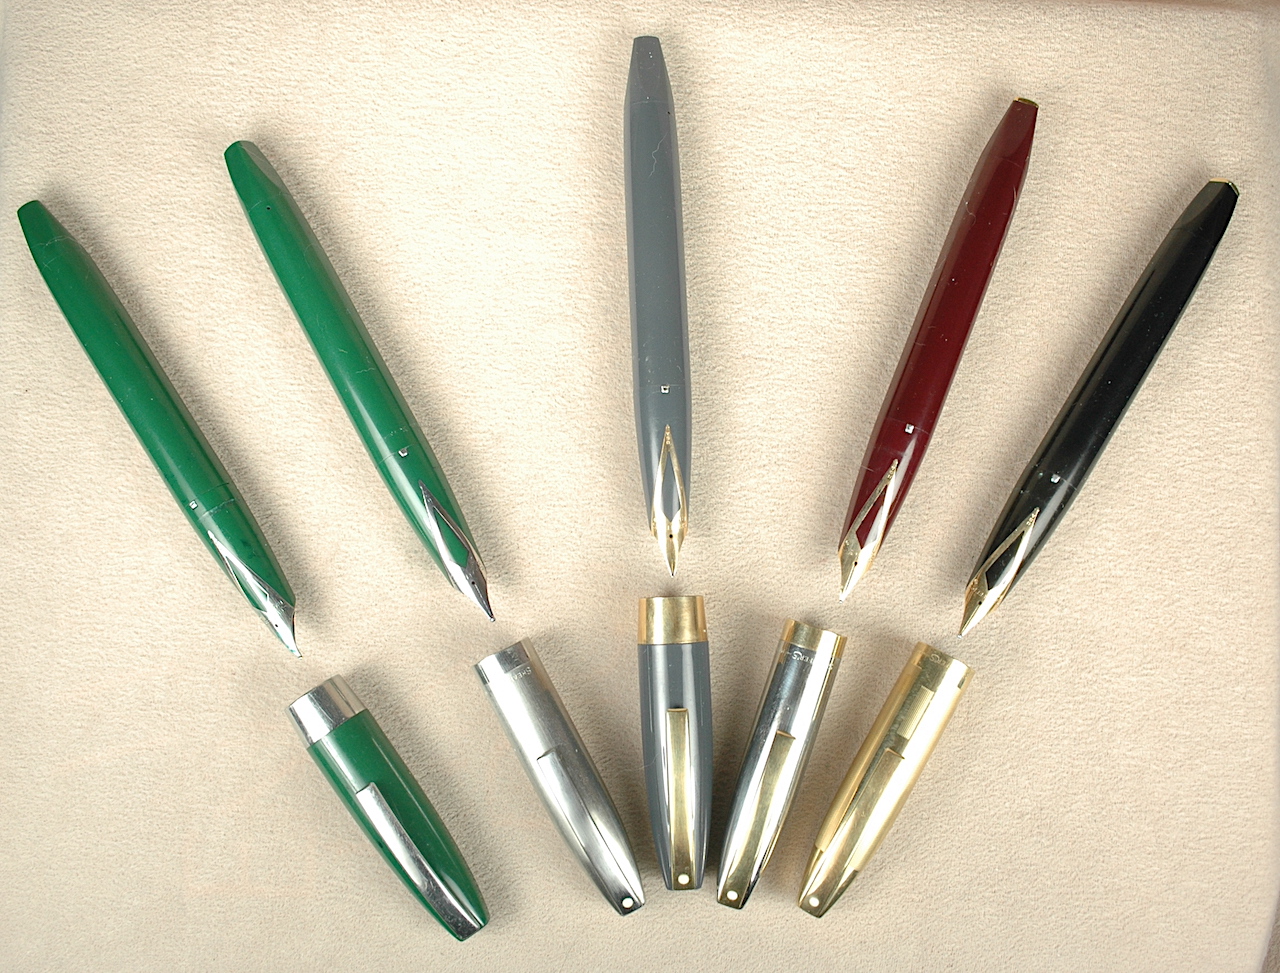 Vintage Fountain Pens: 5 Brands You Should Buy Now